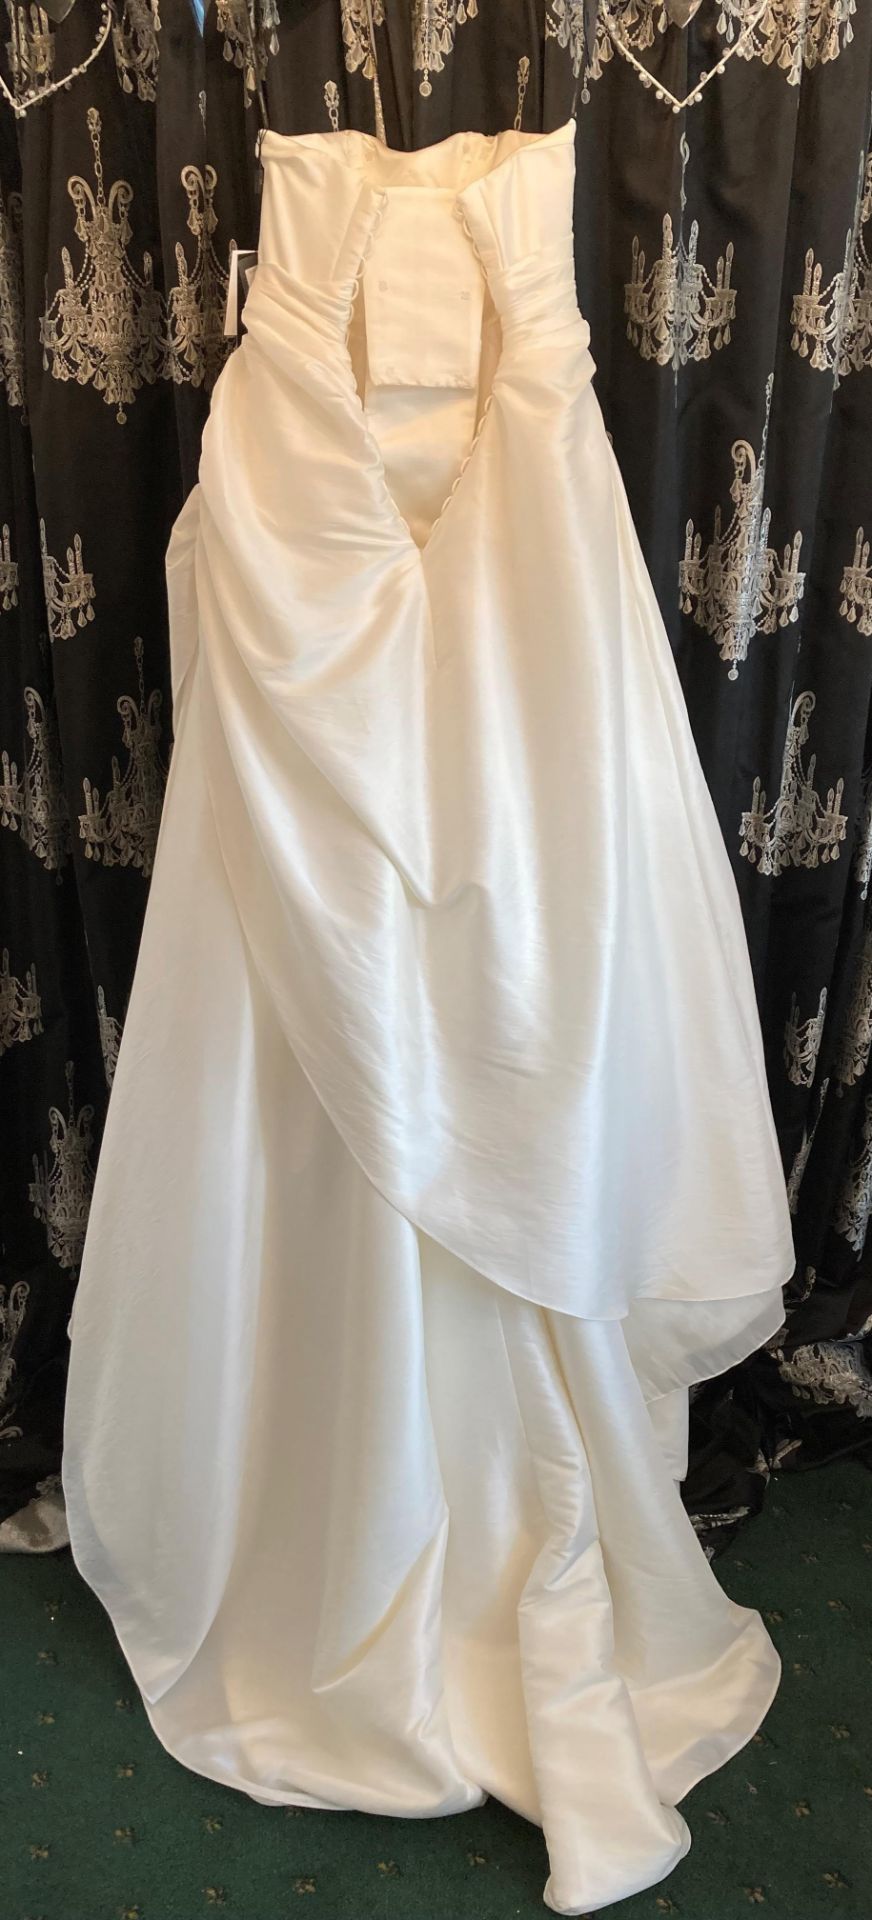 Taffeta ball gown, ivory, size 12. - Image 4 of 4